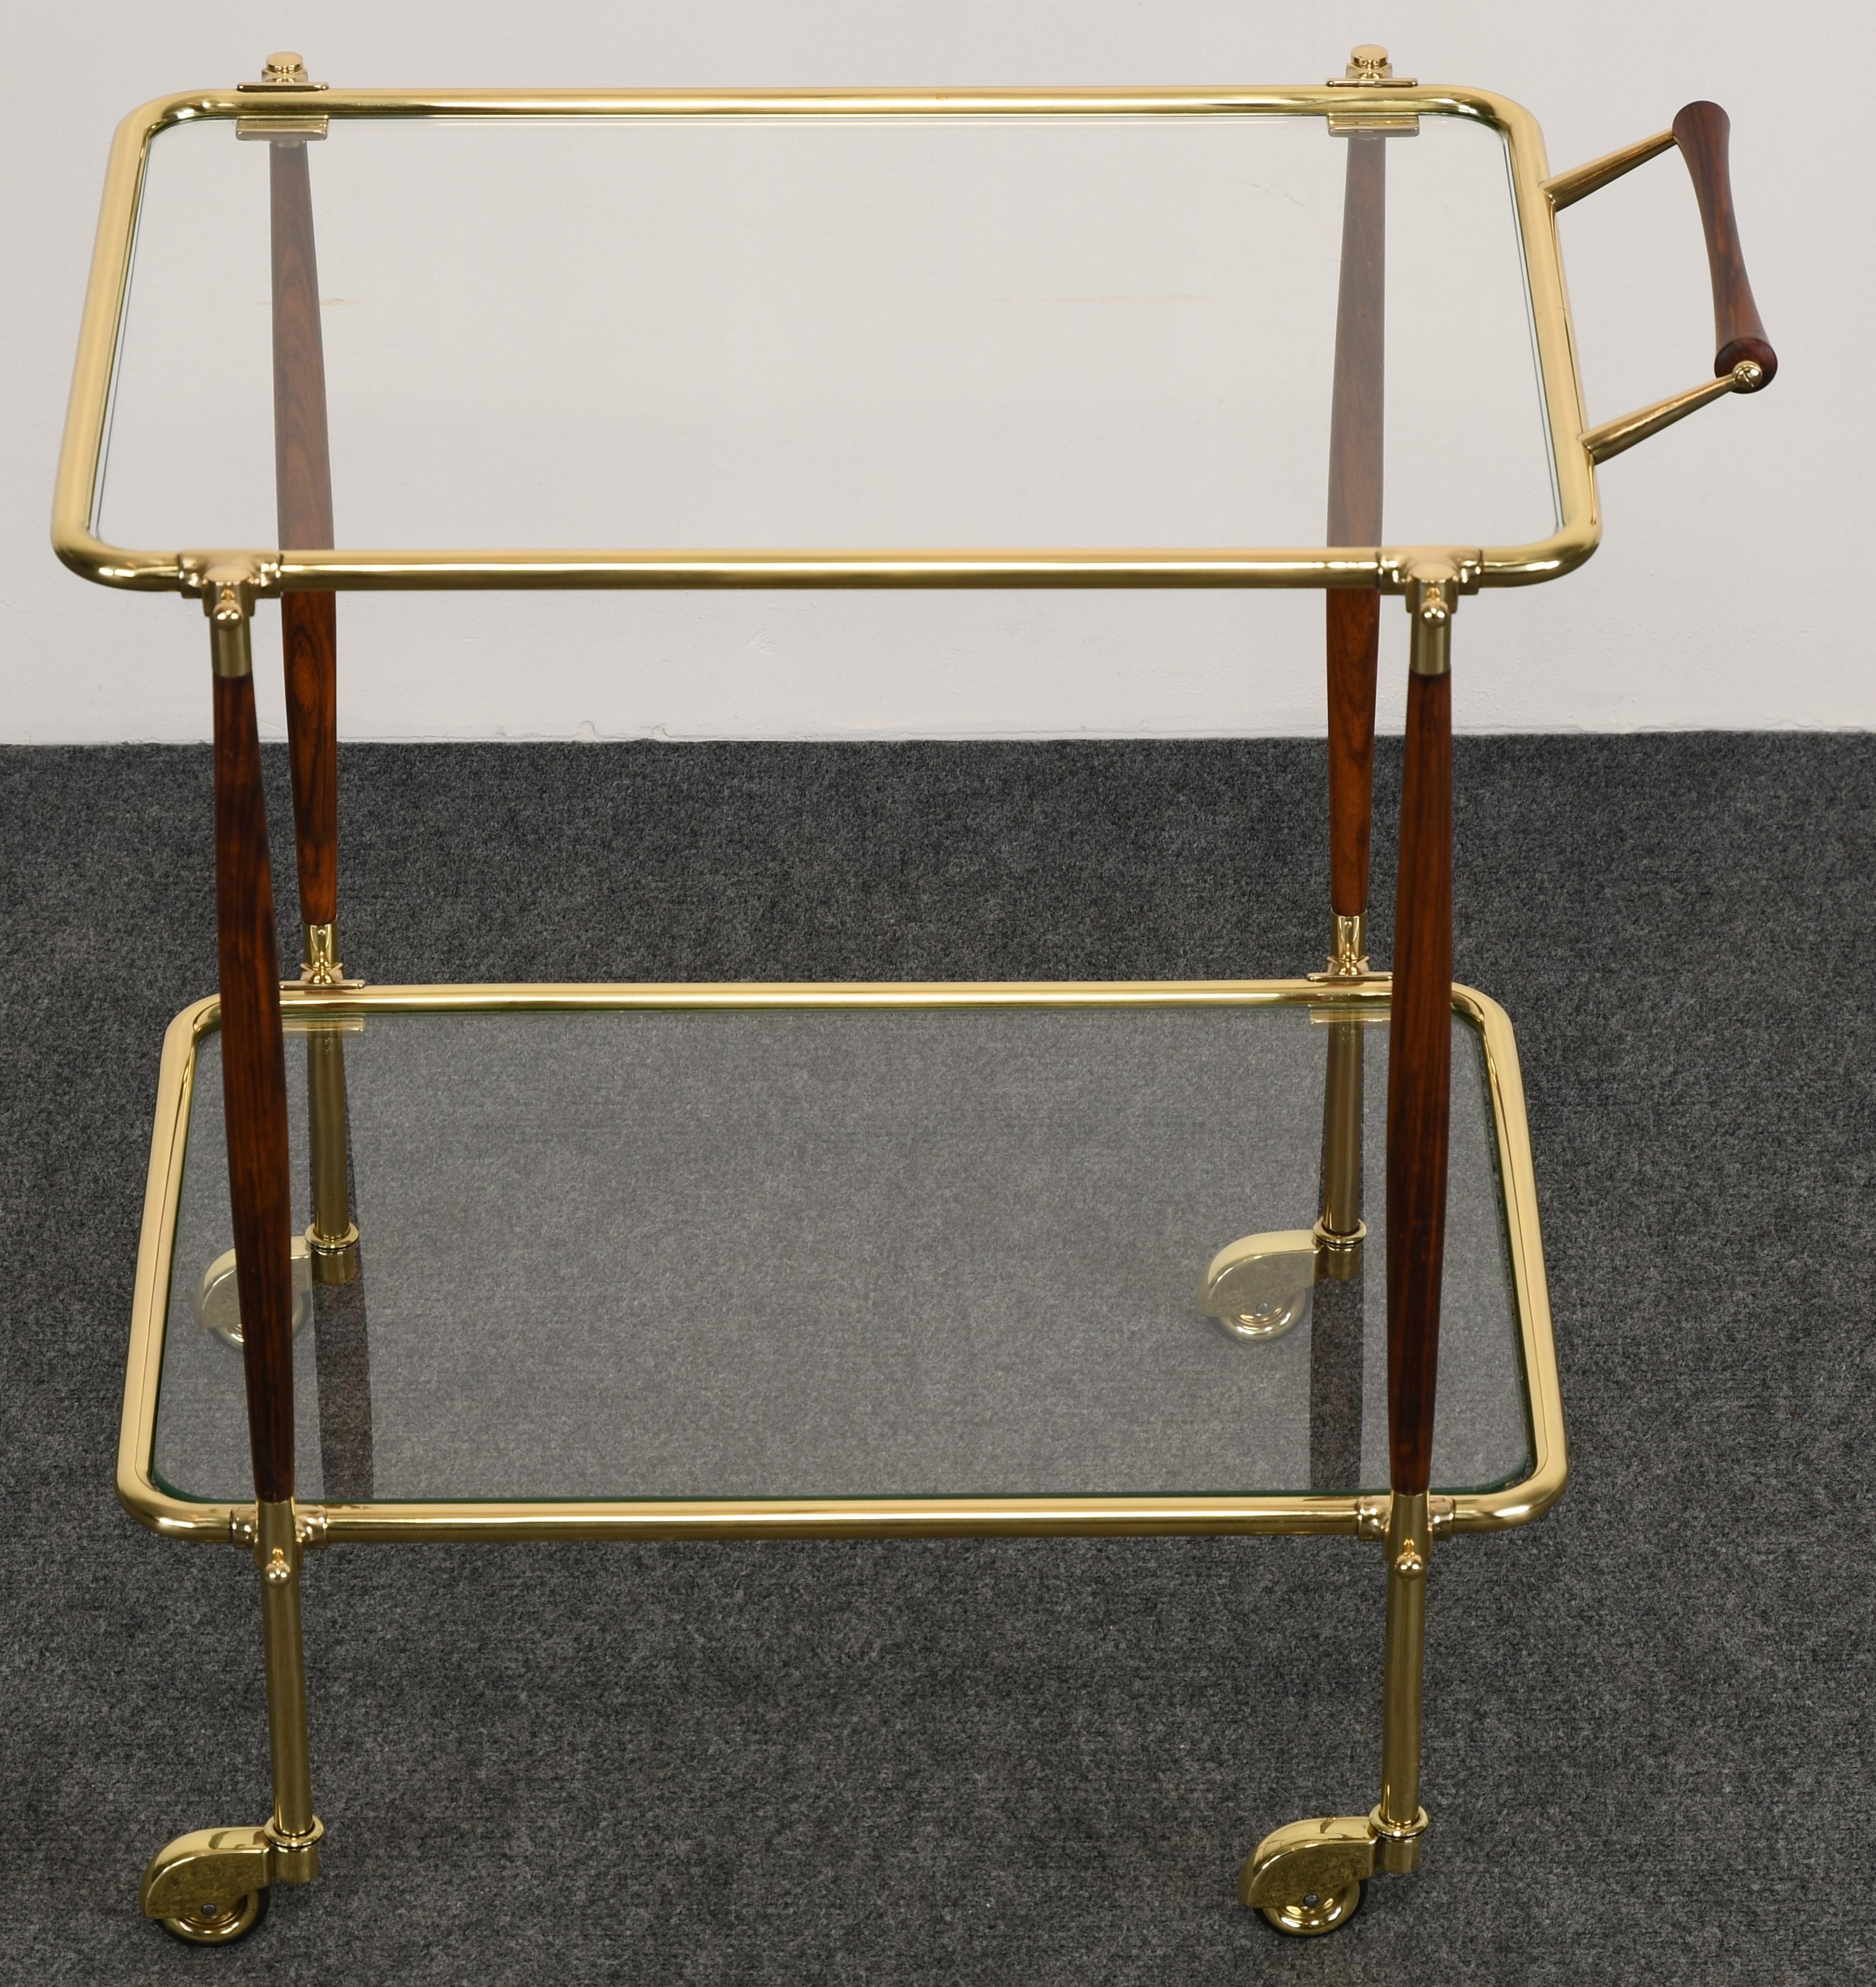 A gorgeous brass and rosewood bar cart or tea cart in the manner of Cesare Lacca. Newly restored finish. Glass is original but has some scratches, however, not distracting. 

Dimensions: 27.38